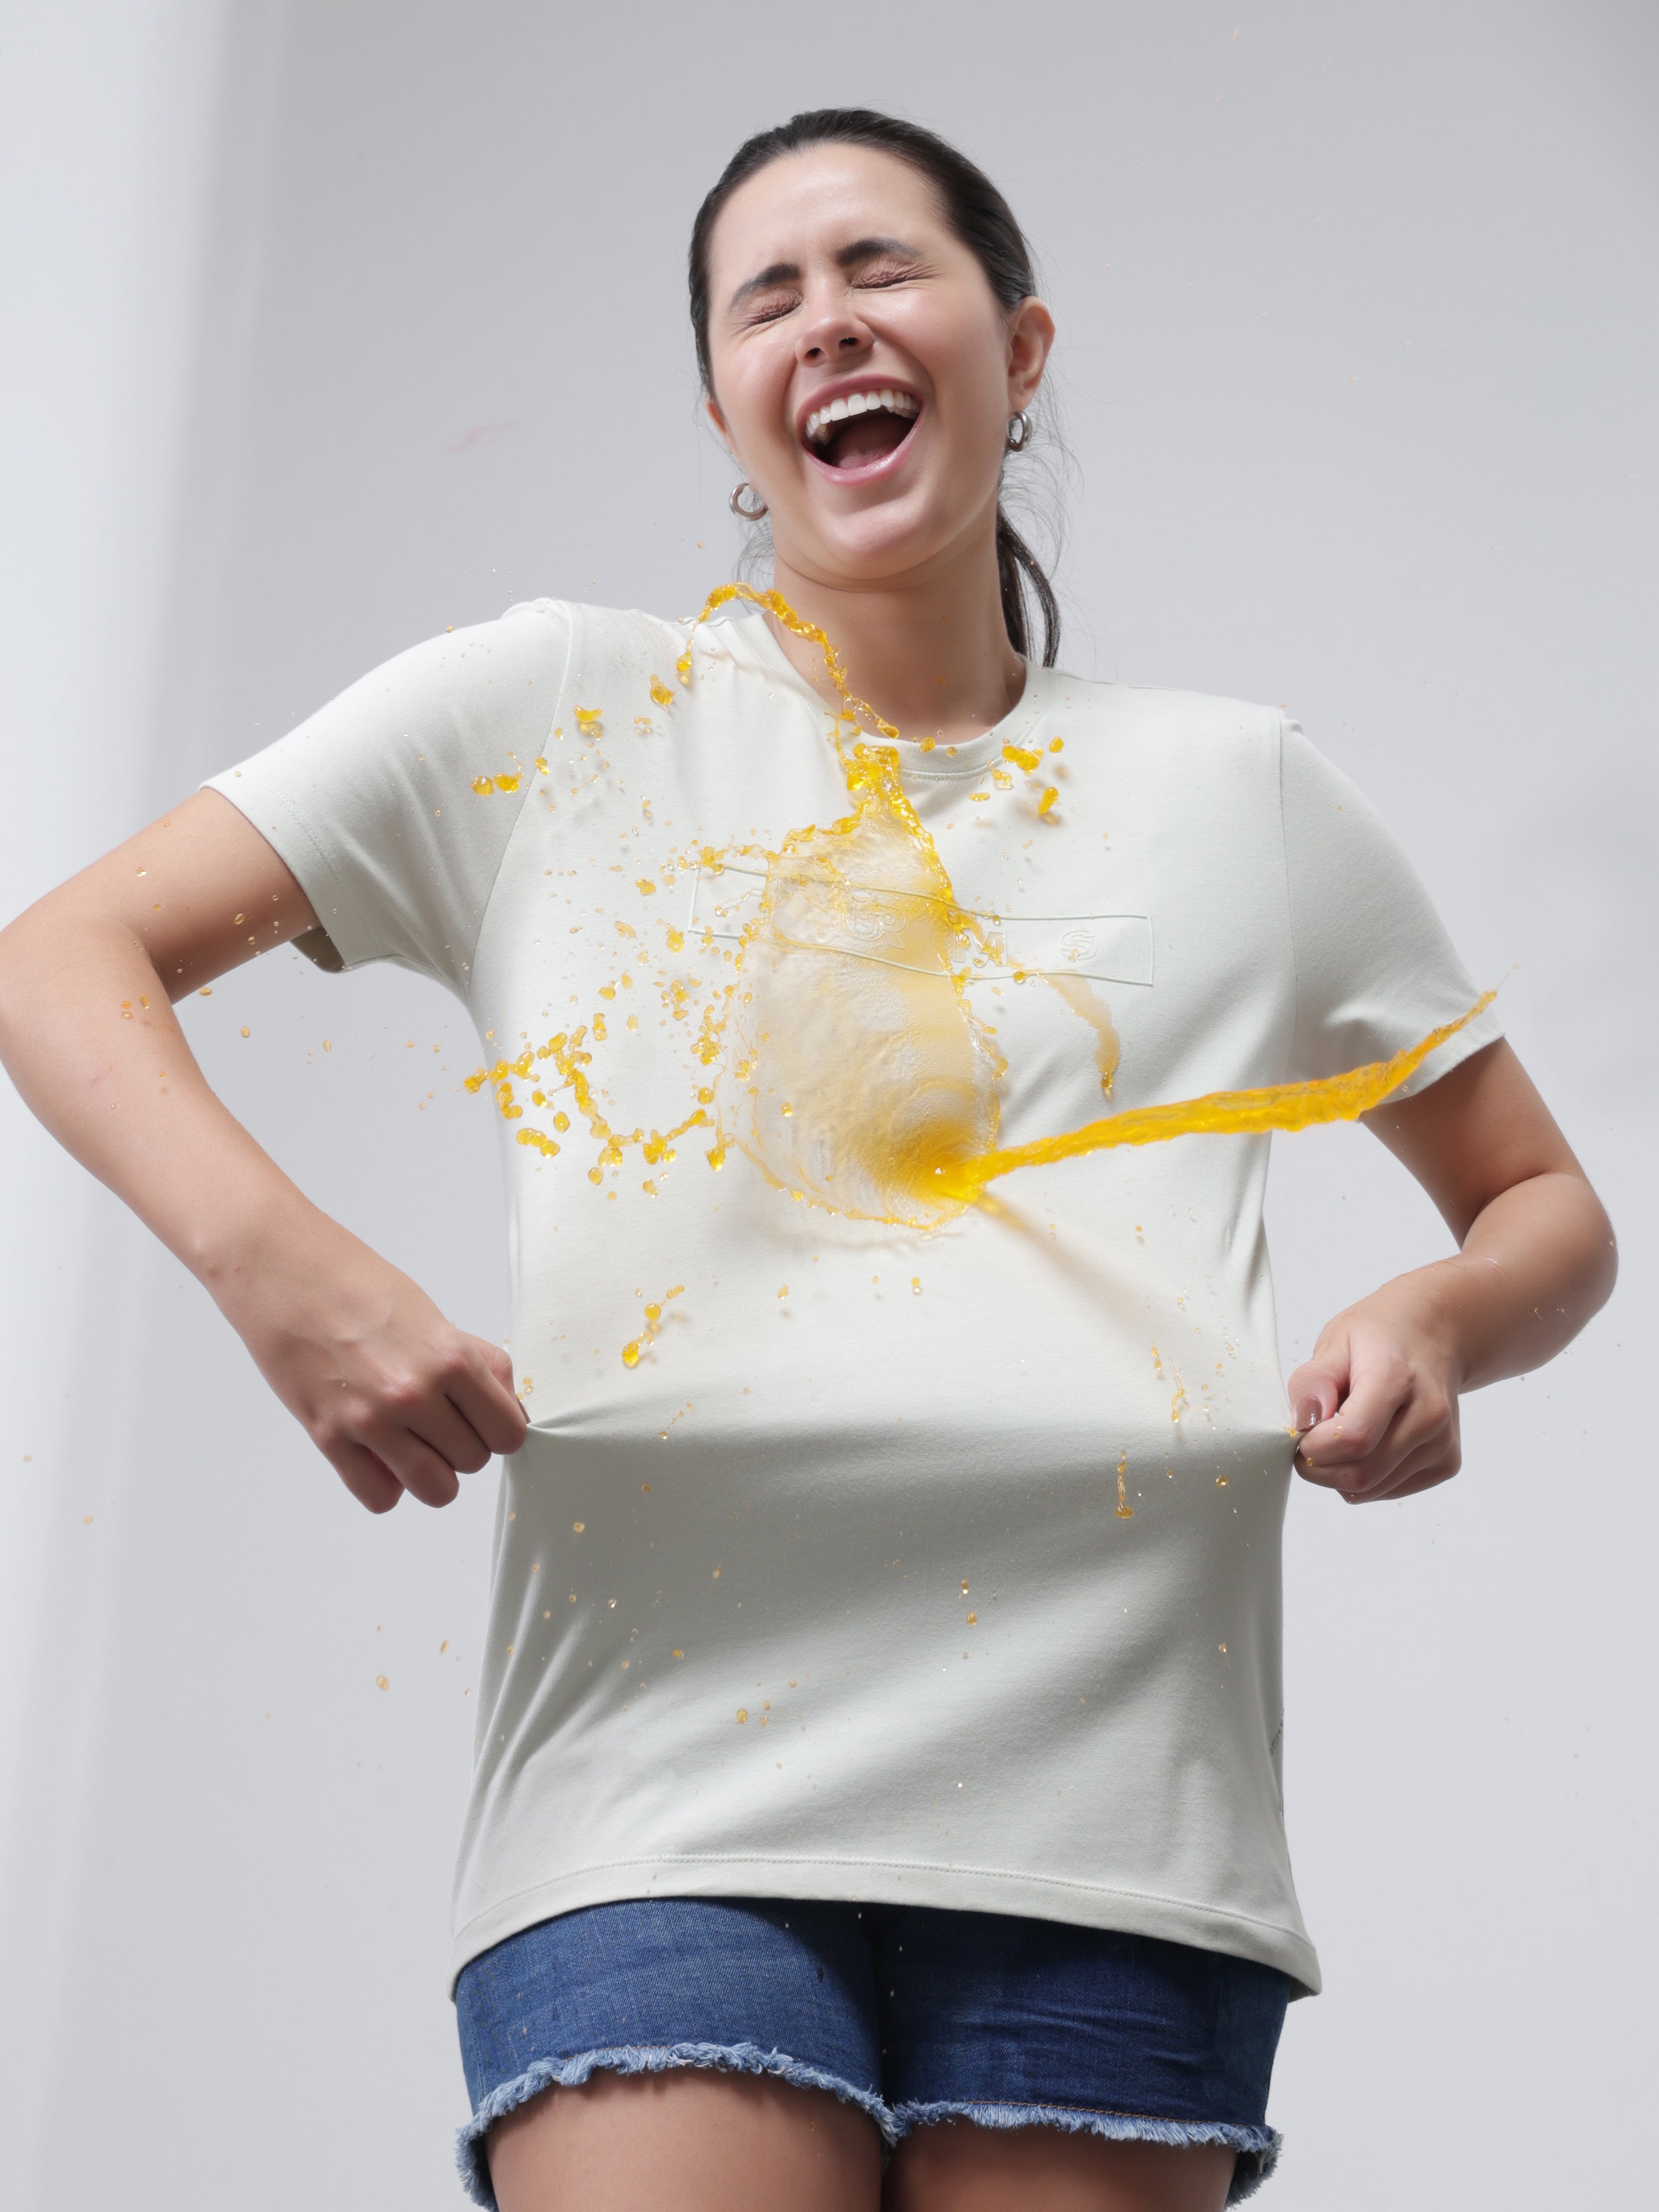 Woman demonstrating stain-repellent Lime Enigma T-shirt by Turms with yellow liquid spill, showcasing anti-stain and anti-odor features.